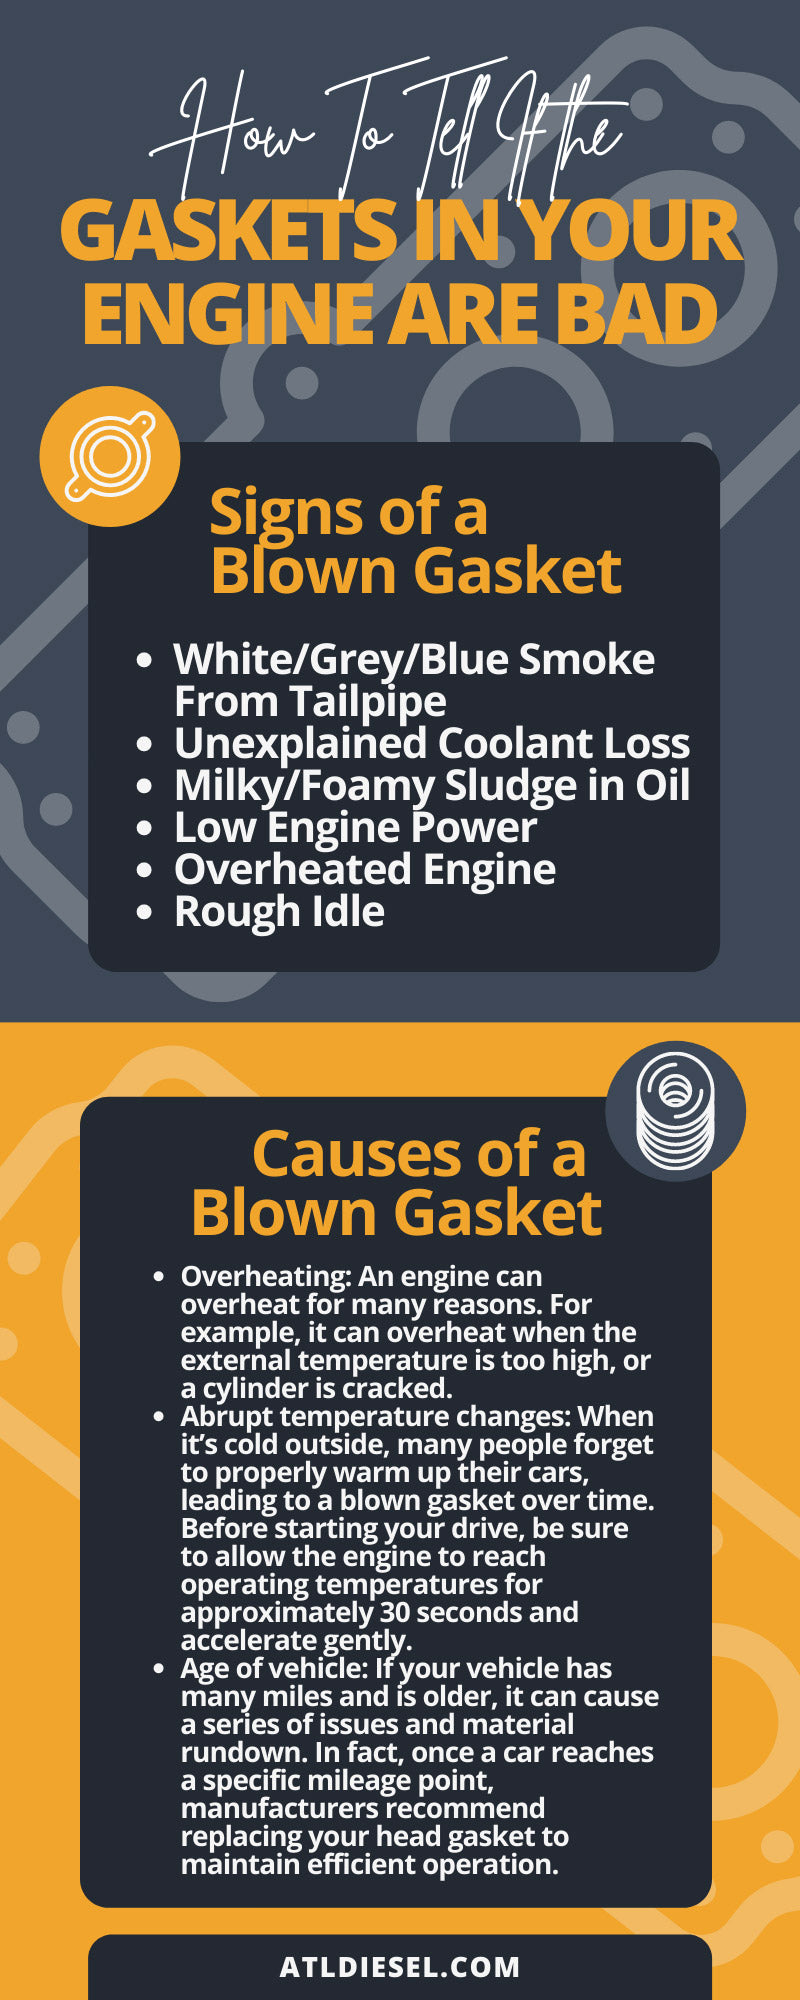 How To Tell If the Gaskets in Your Engine Are Bad